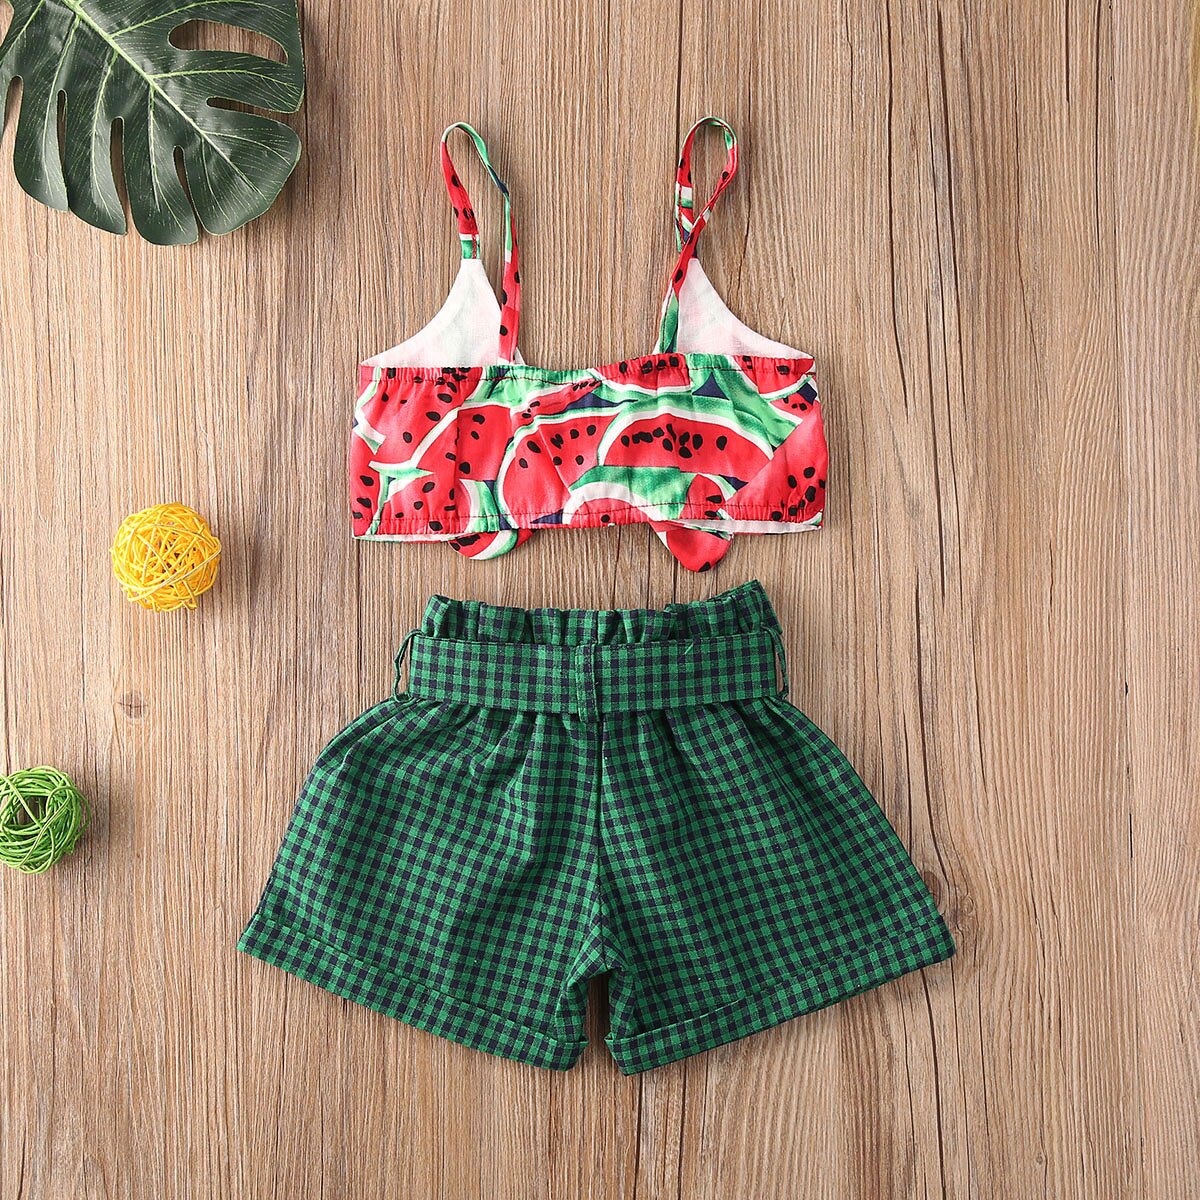 Emmababy-Summer-Toddler-Baby-Girls-Clothes-Watermelon-Bow-Vest-Crop-Tops-Shirt-Plaid-Short-Pants-Outfits-4